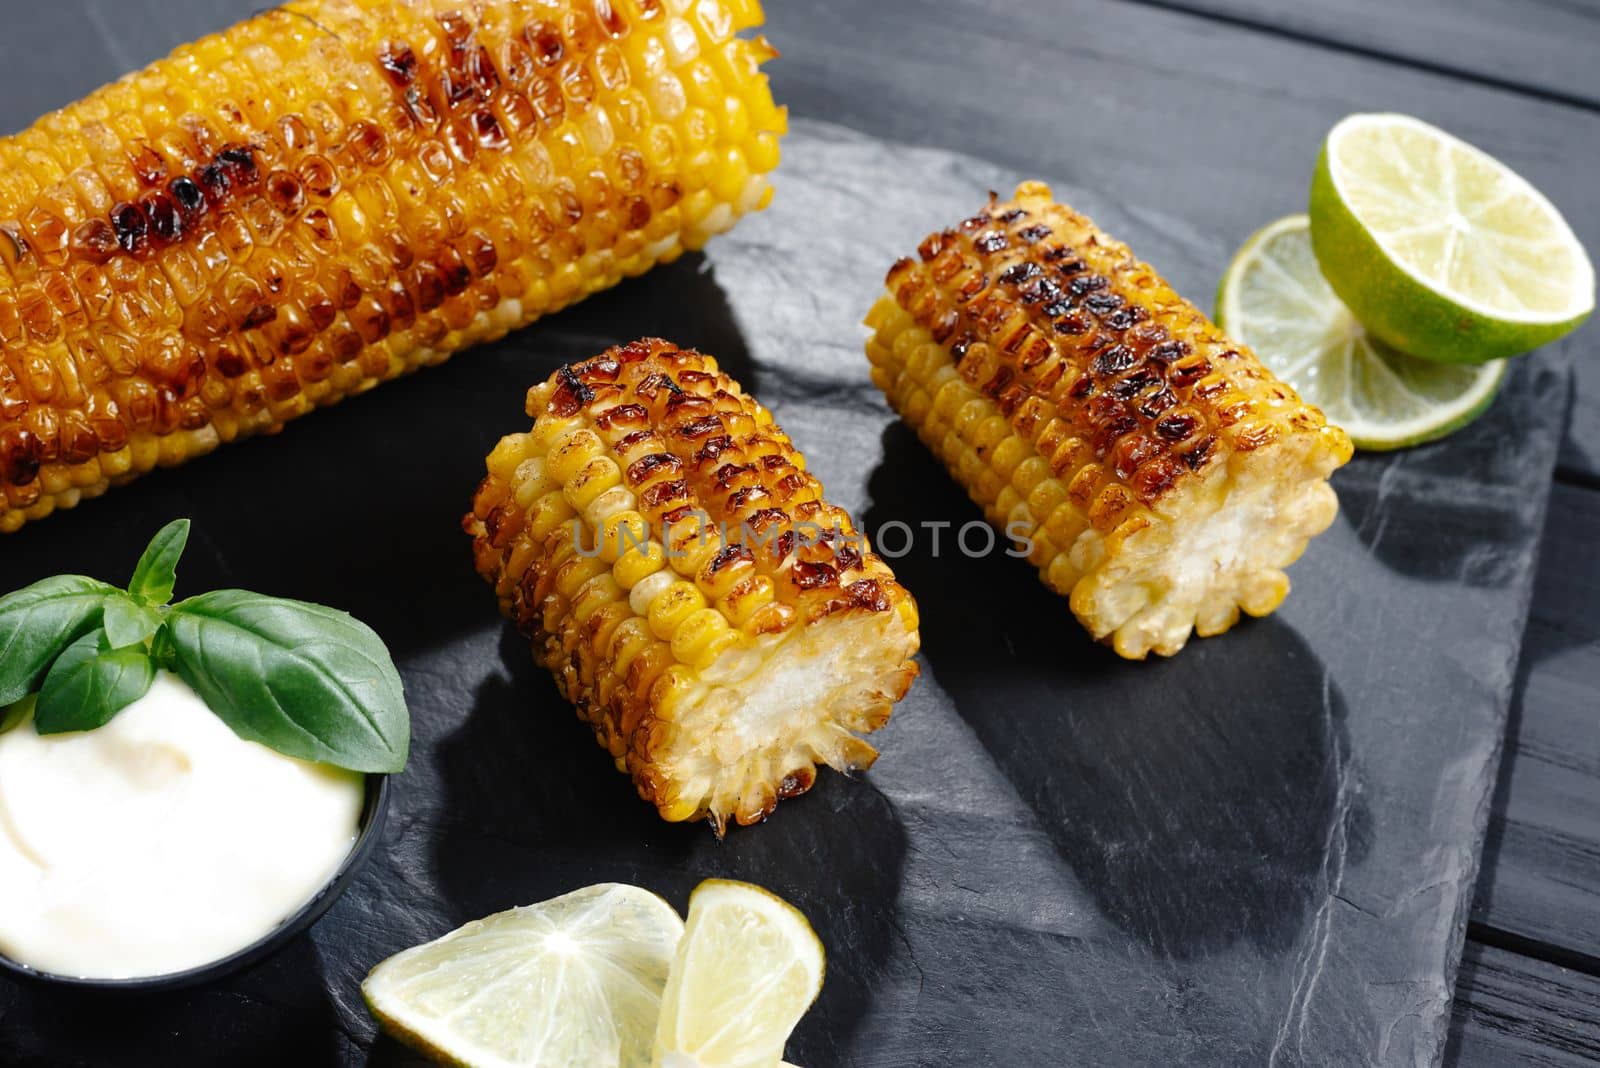 Grilled corn on the cob with butter and salt on the grill plate, close-up, top view